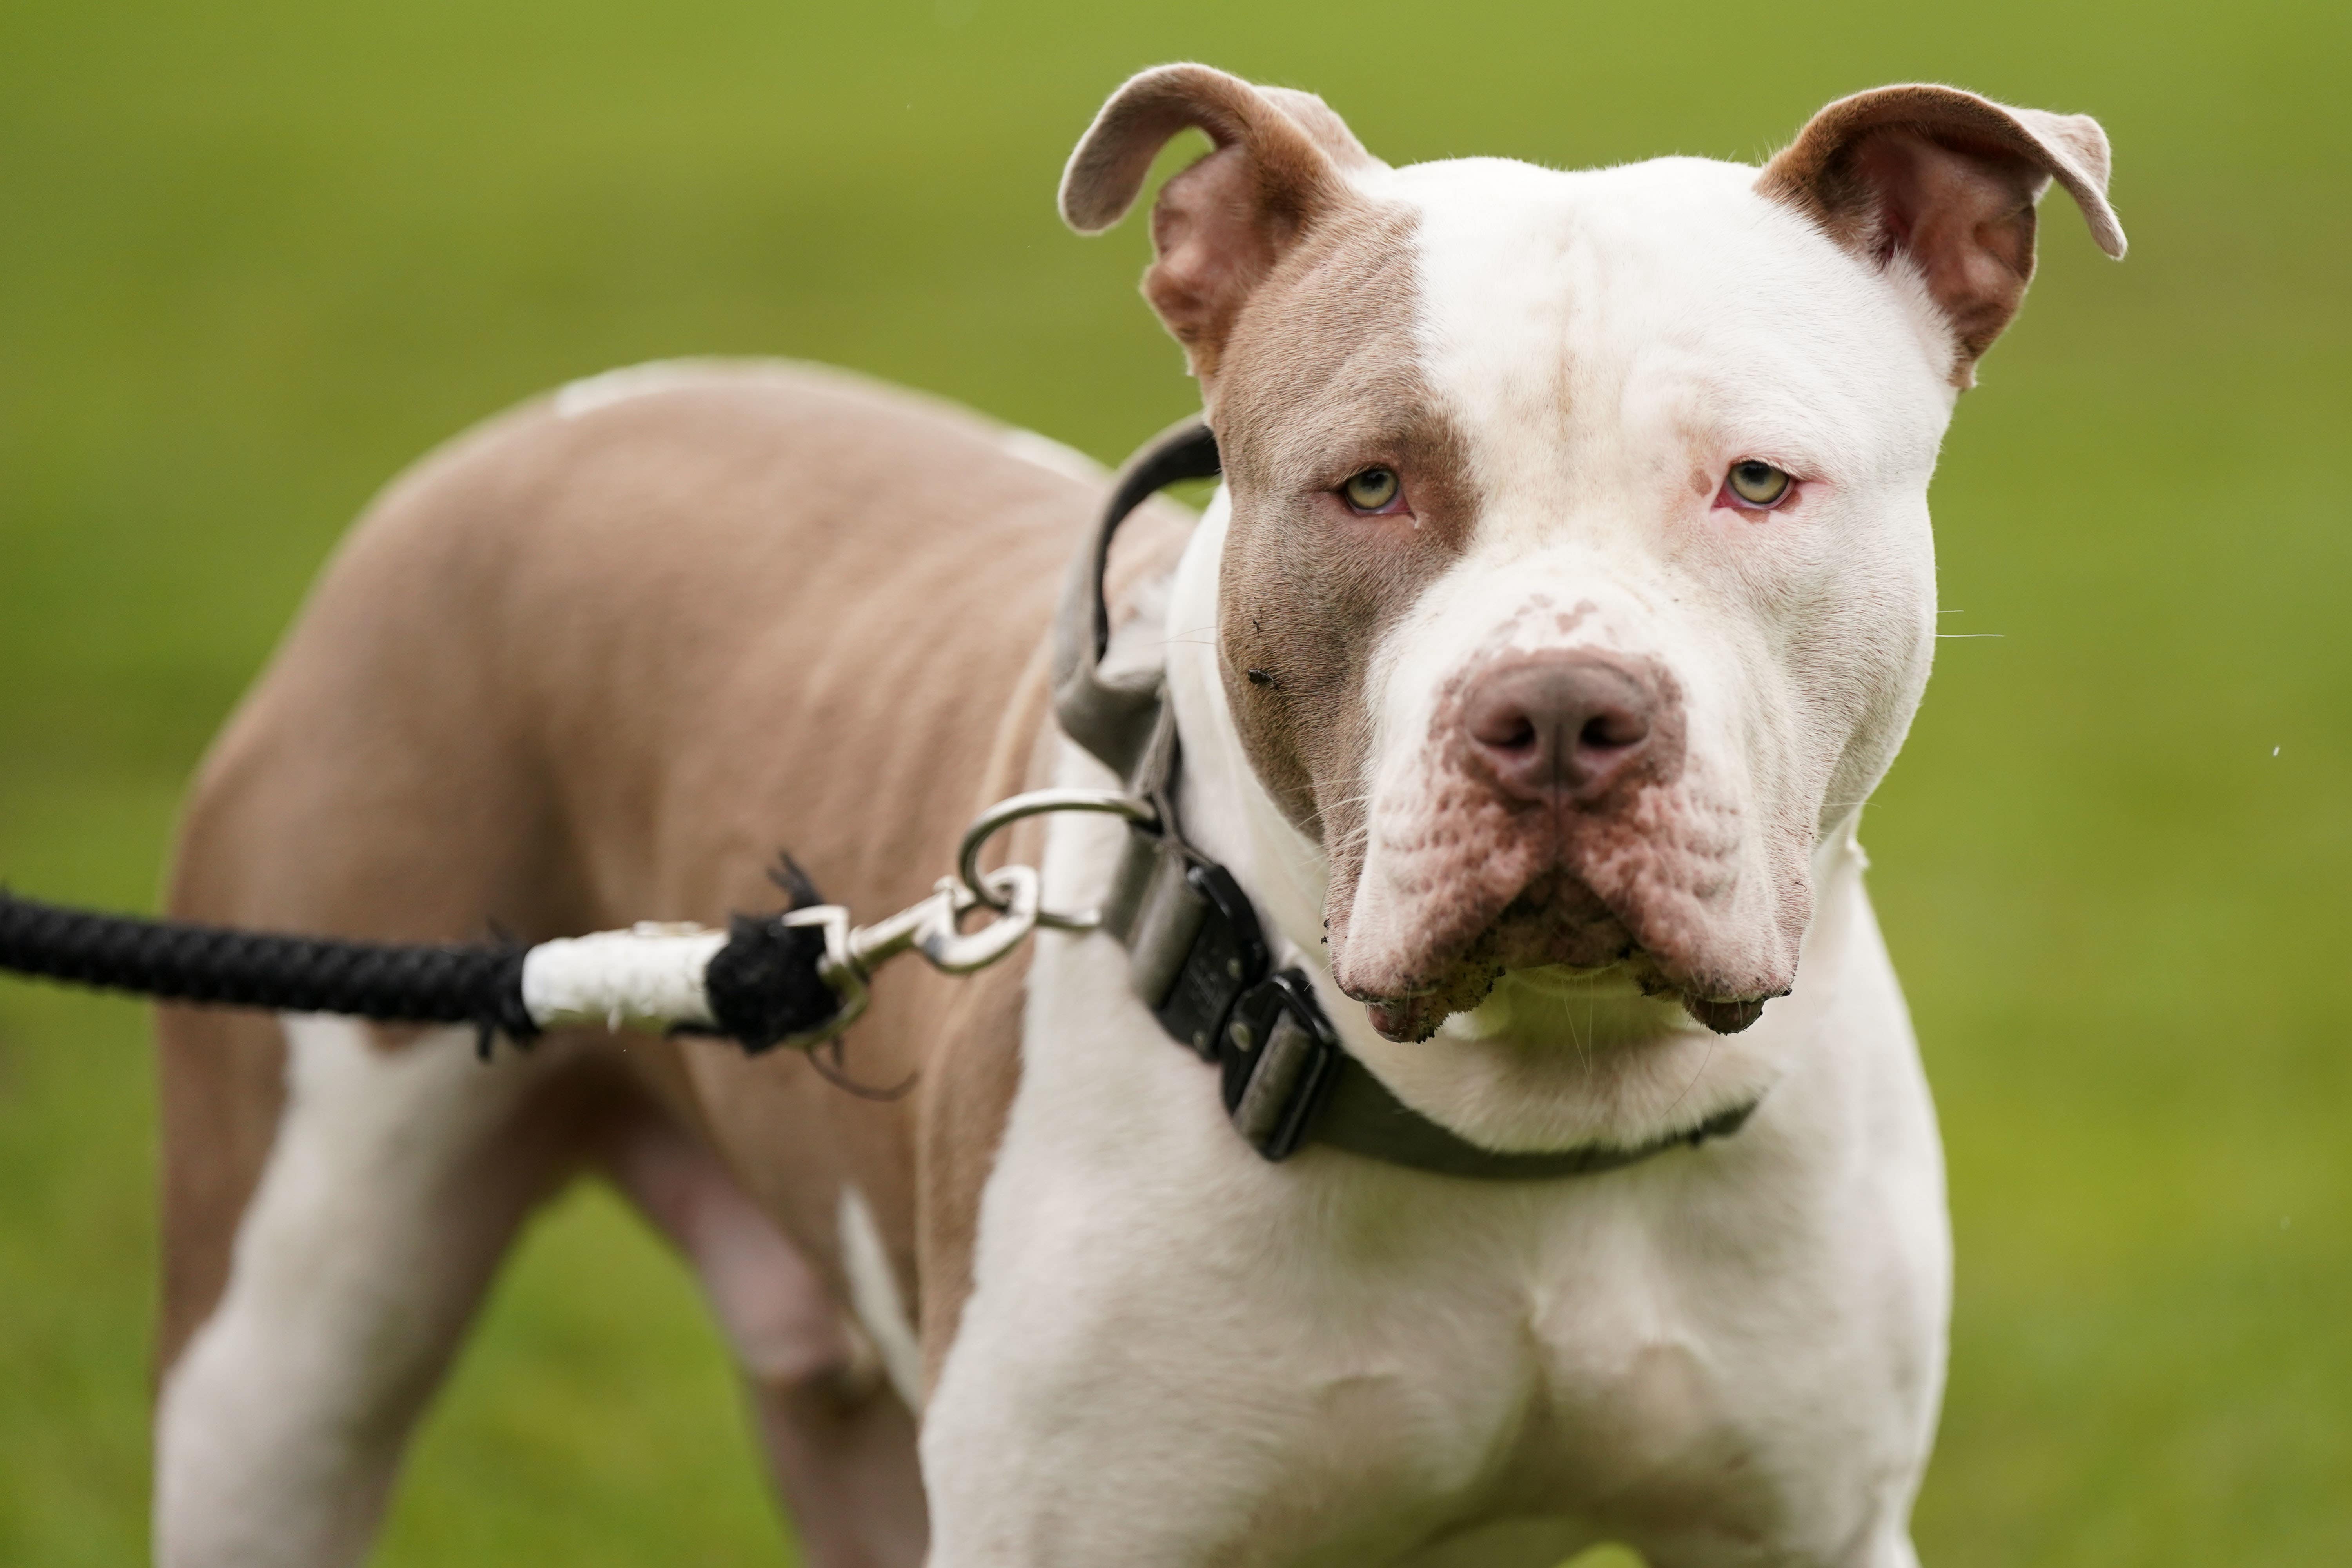 American bully XL dogs should be banned